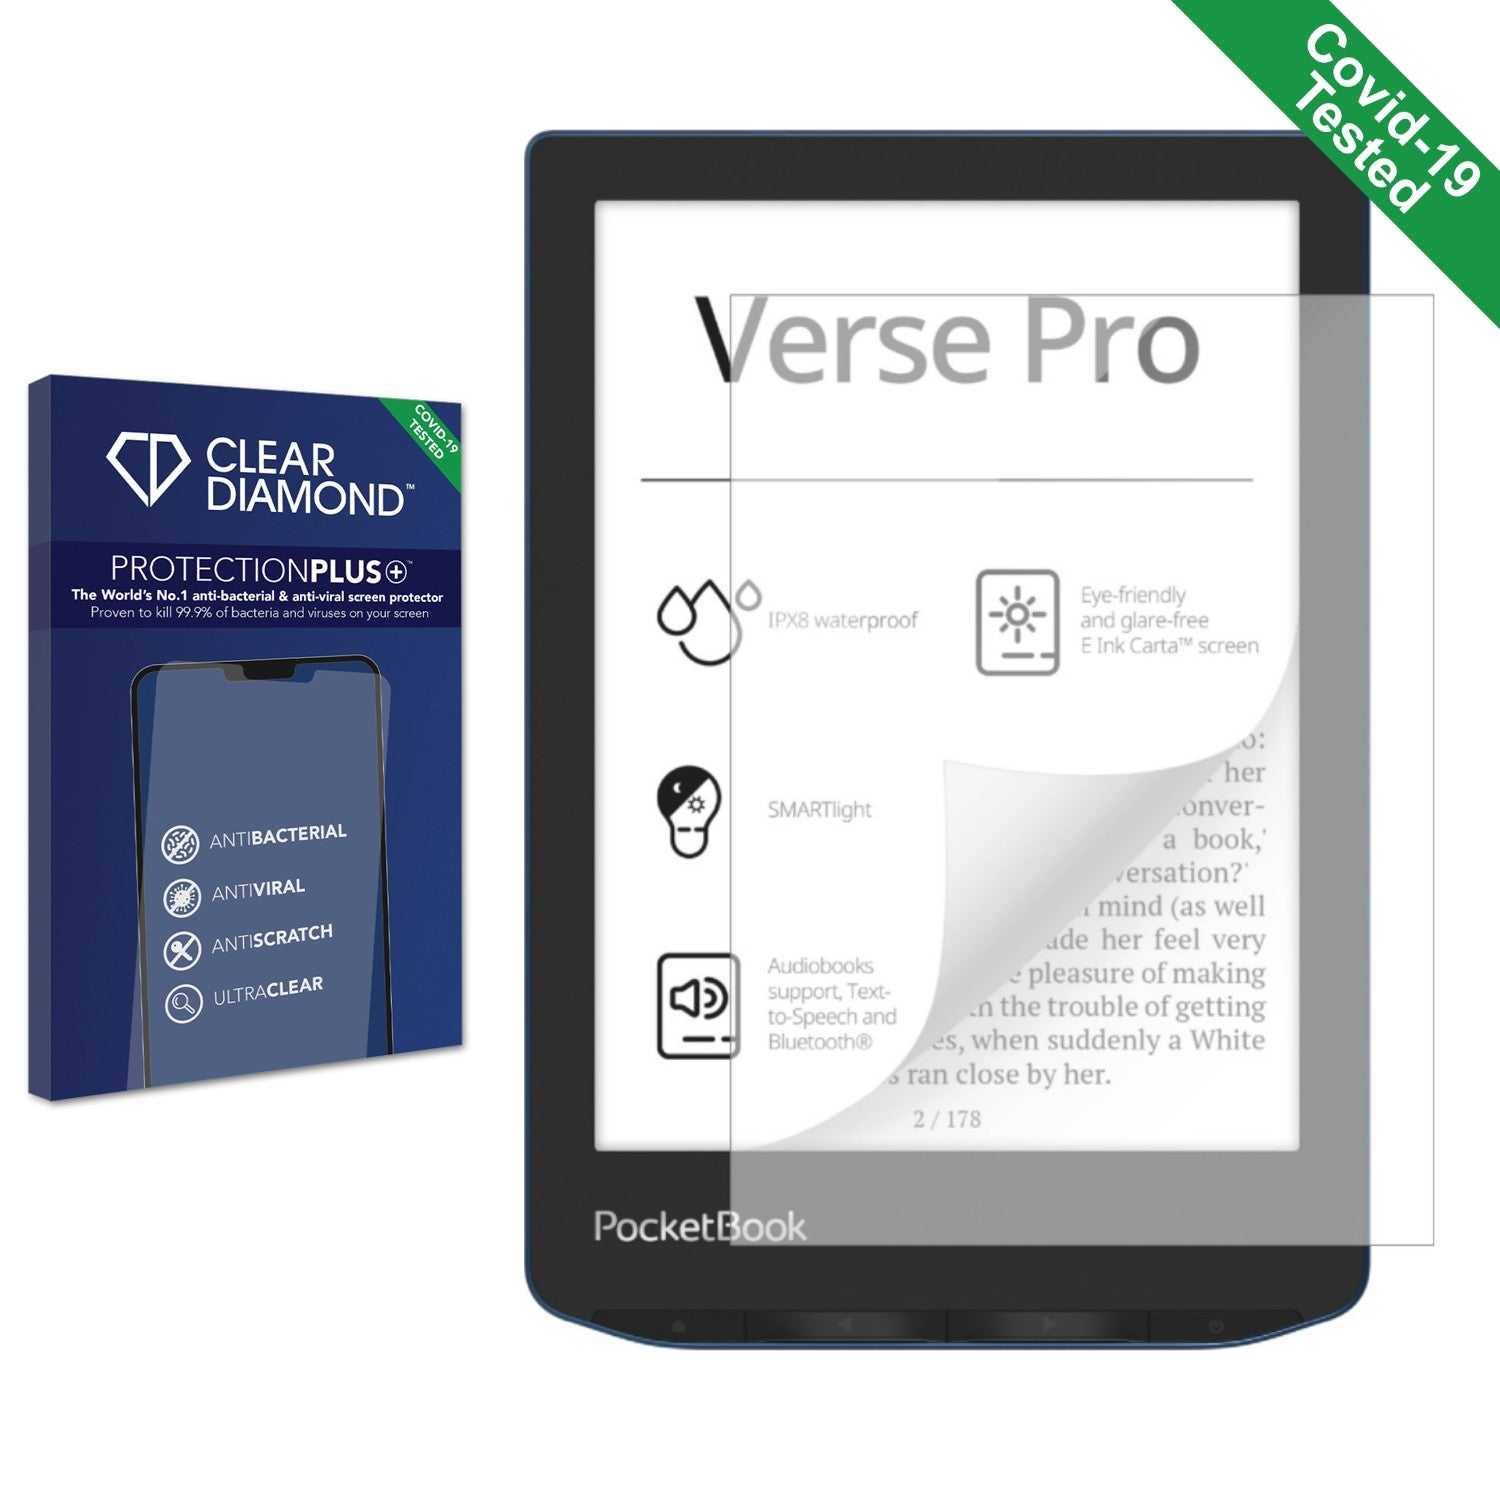 ScreenShield, Clear Diamond Anti-viral Screen Protector for PocketBook Verse Pro